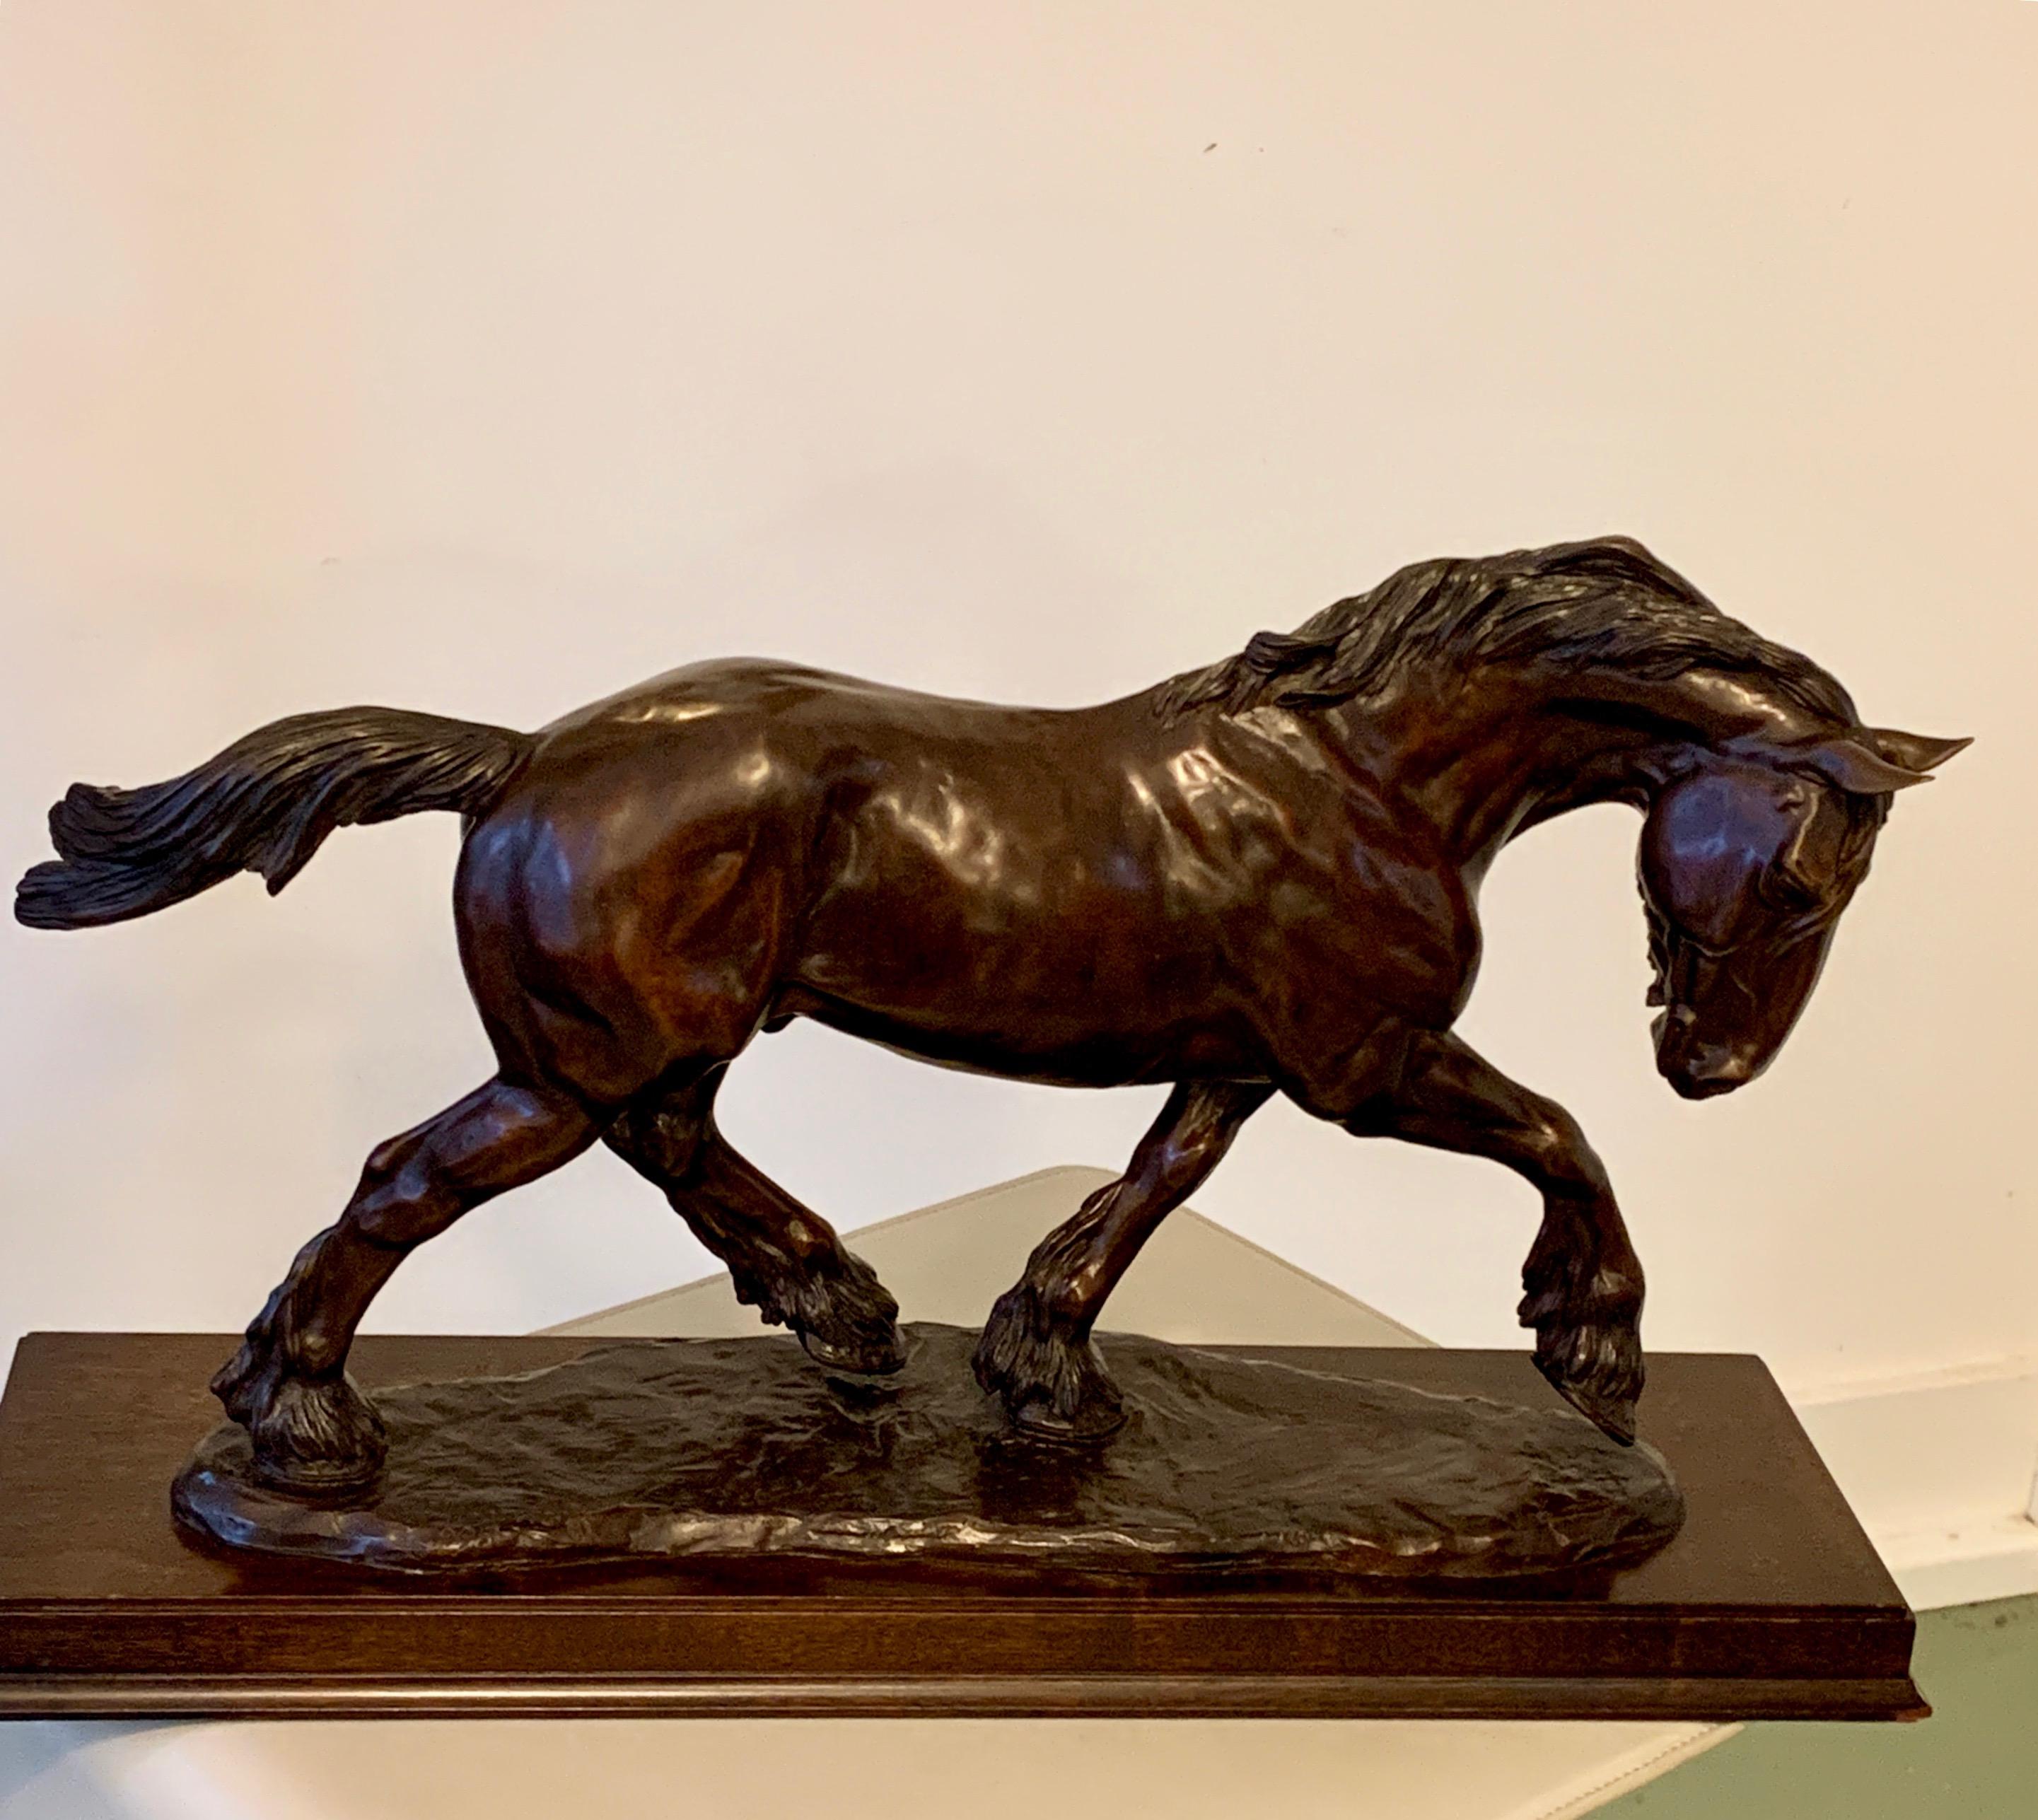 Bronze Shire horse sculpture by British born (1957) artist Gill Parker. Power, movement and elegance completely captured in this wonderful bronze.
Mounted on wooden base.
 